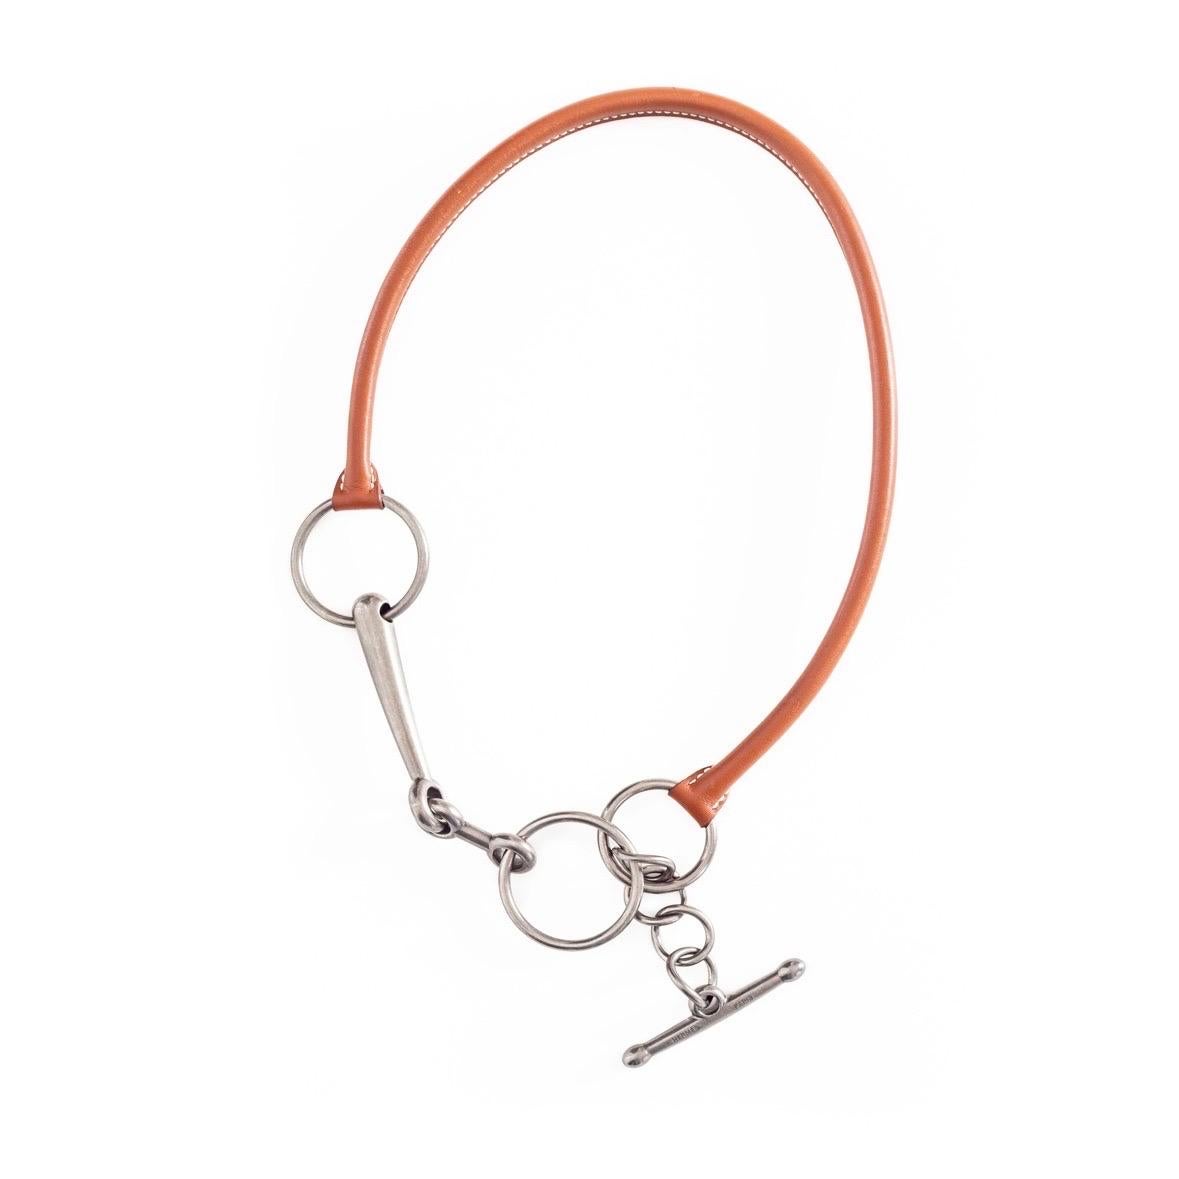 Hermès Tarquinia Brown Leather Palladium Toggle Necklace

Brown/Silver
Rolled calf leather
Matte palladium hardware
Ring accents
Toggle fastening
Stamped
Excellent pre-owned condition; little signs of wear and minor tarnishing
Size &